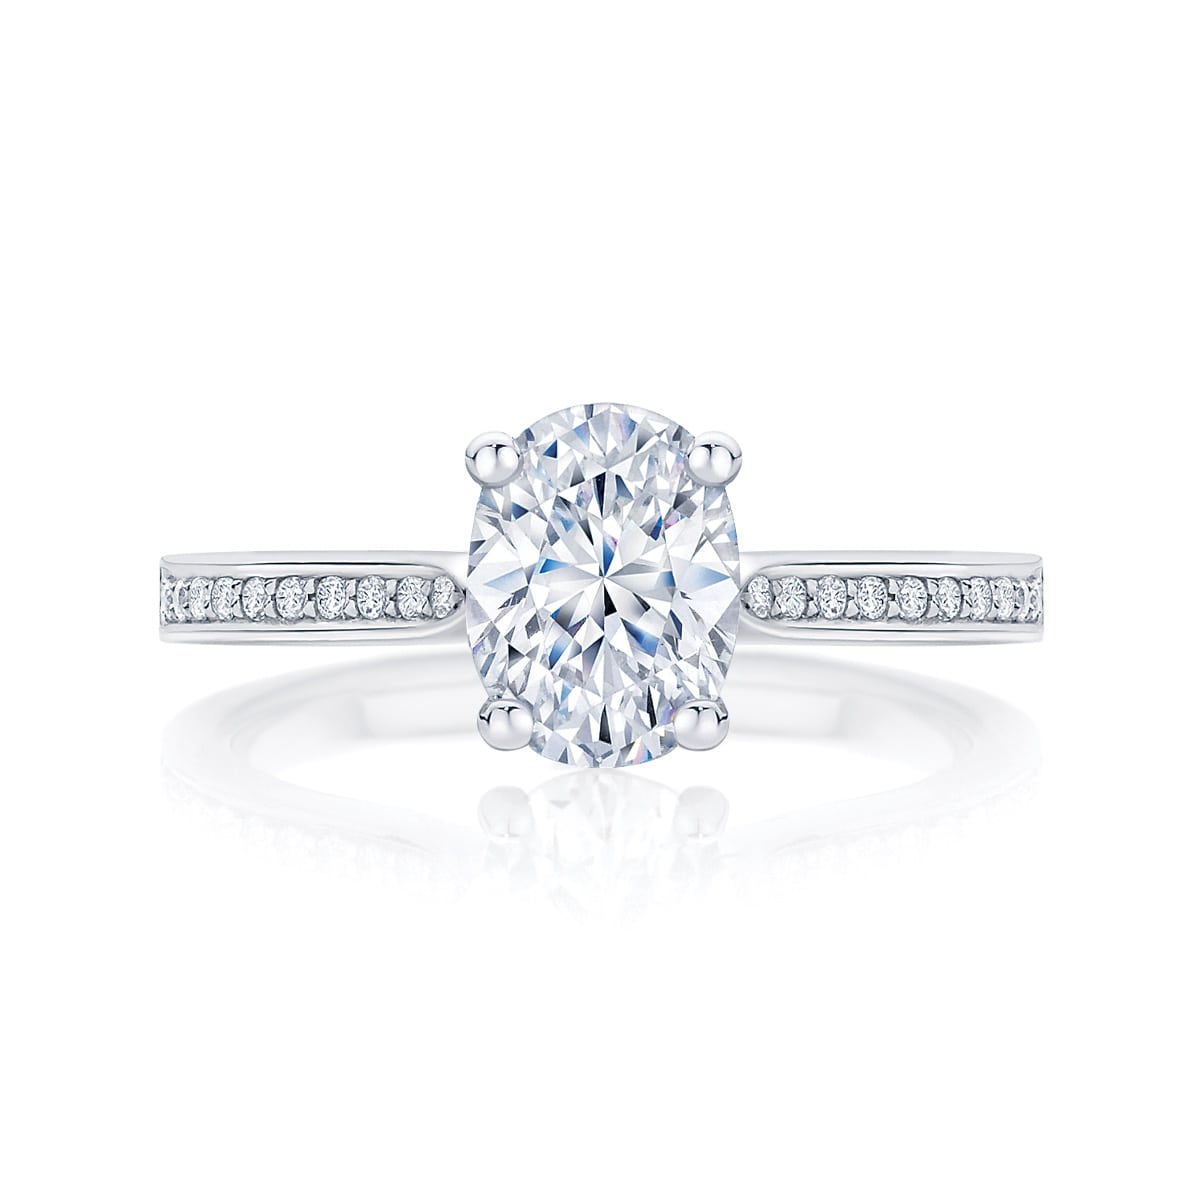 Oval Diamond with Side Stones Ring in Platinum | Accented Ballerina (Oval)